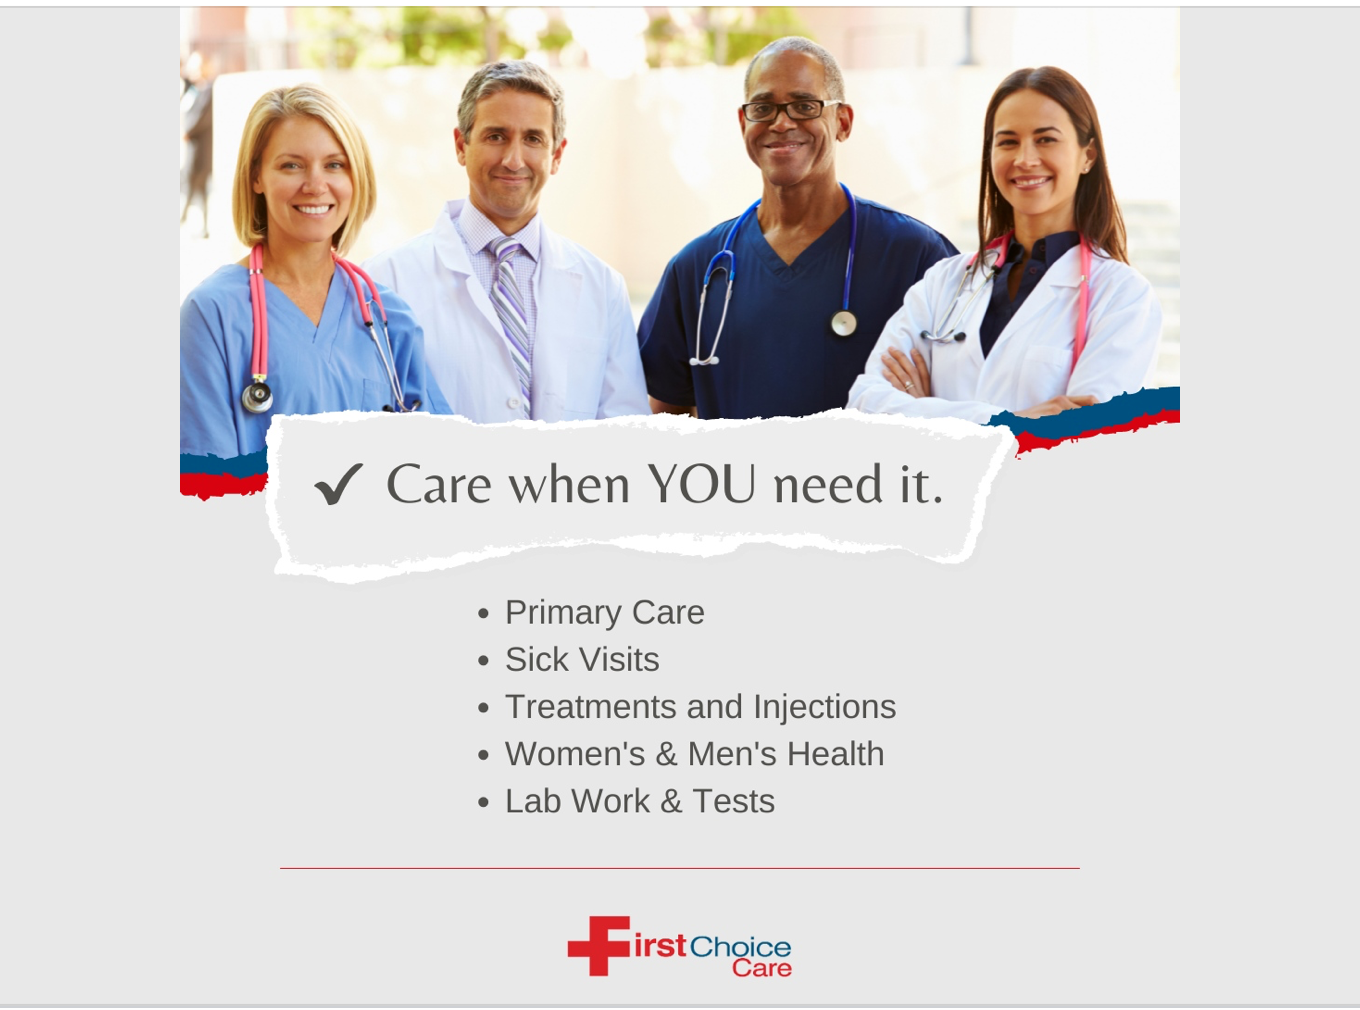 When you need care, First Choice is the place to be! Whatever your care needs are, give us a call to schedule an appointment!